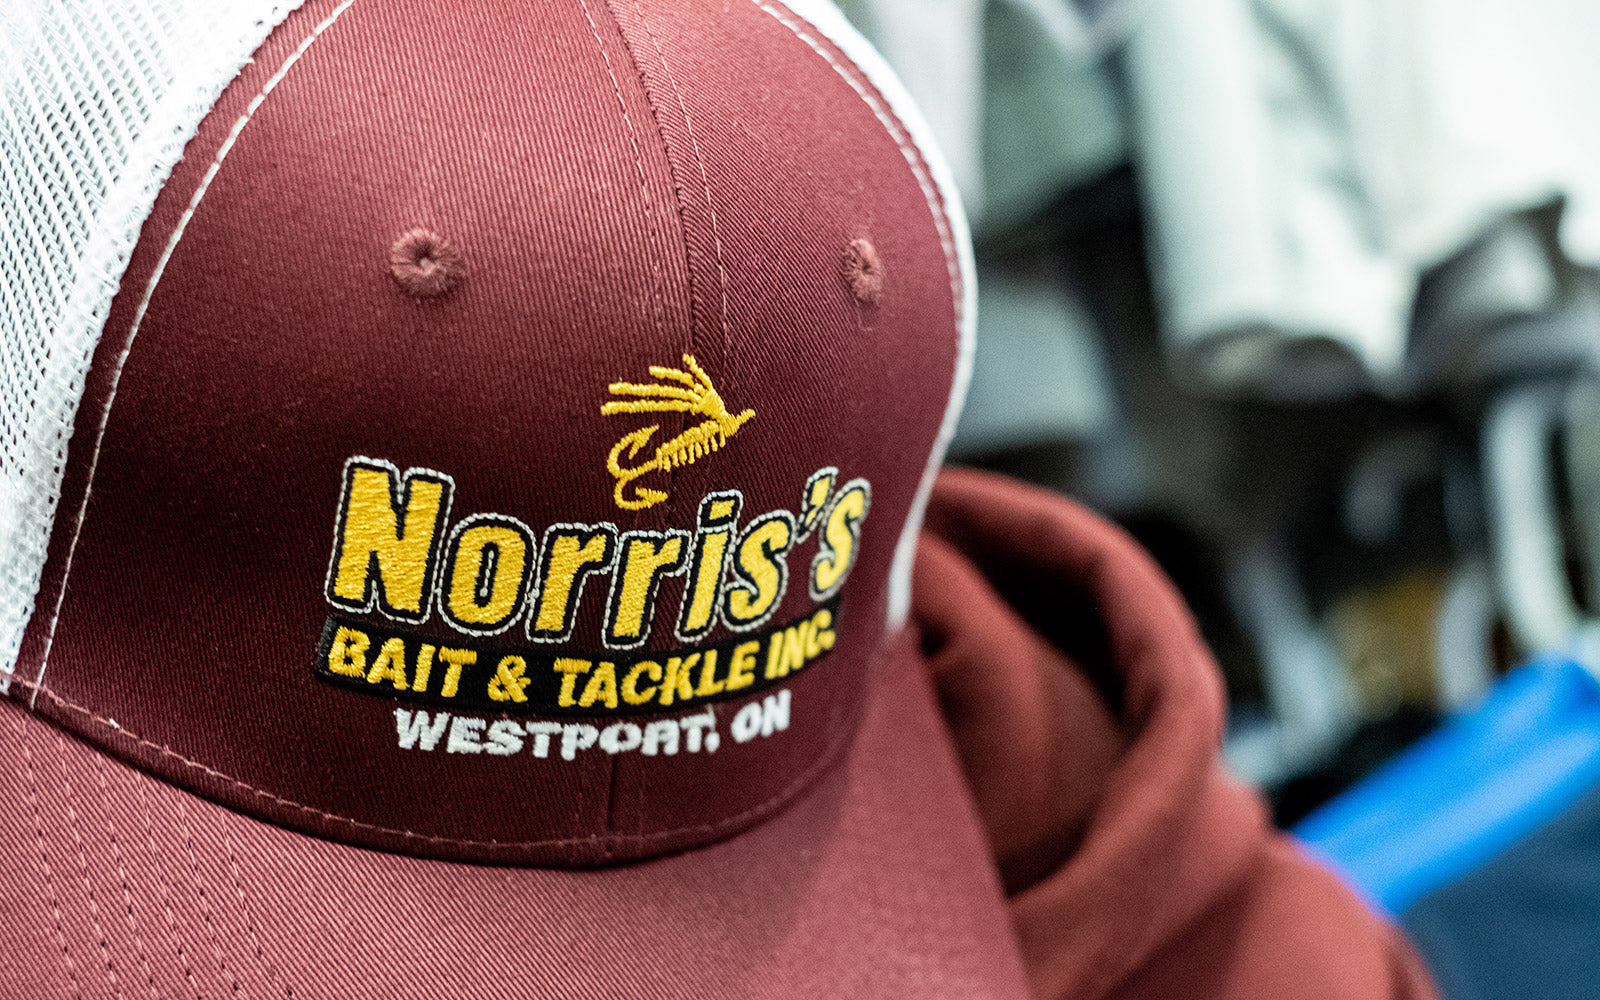 Welcome to Norris's Bait and Tackle